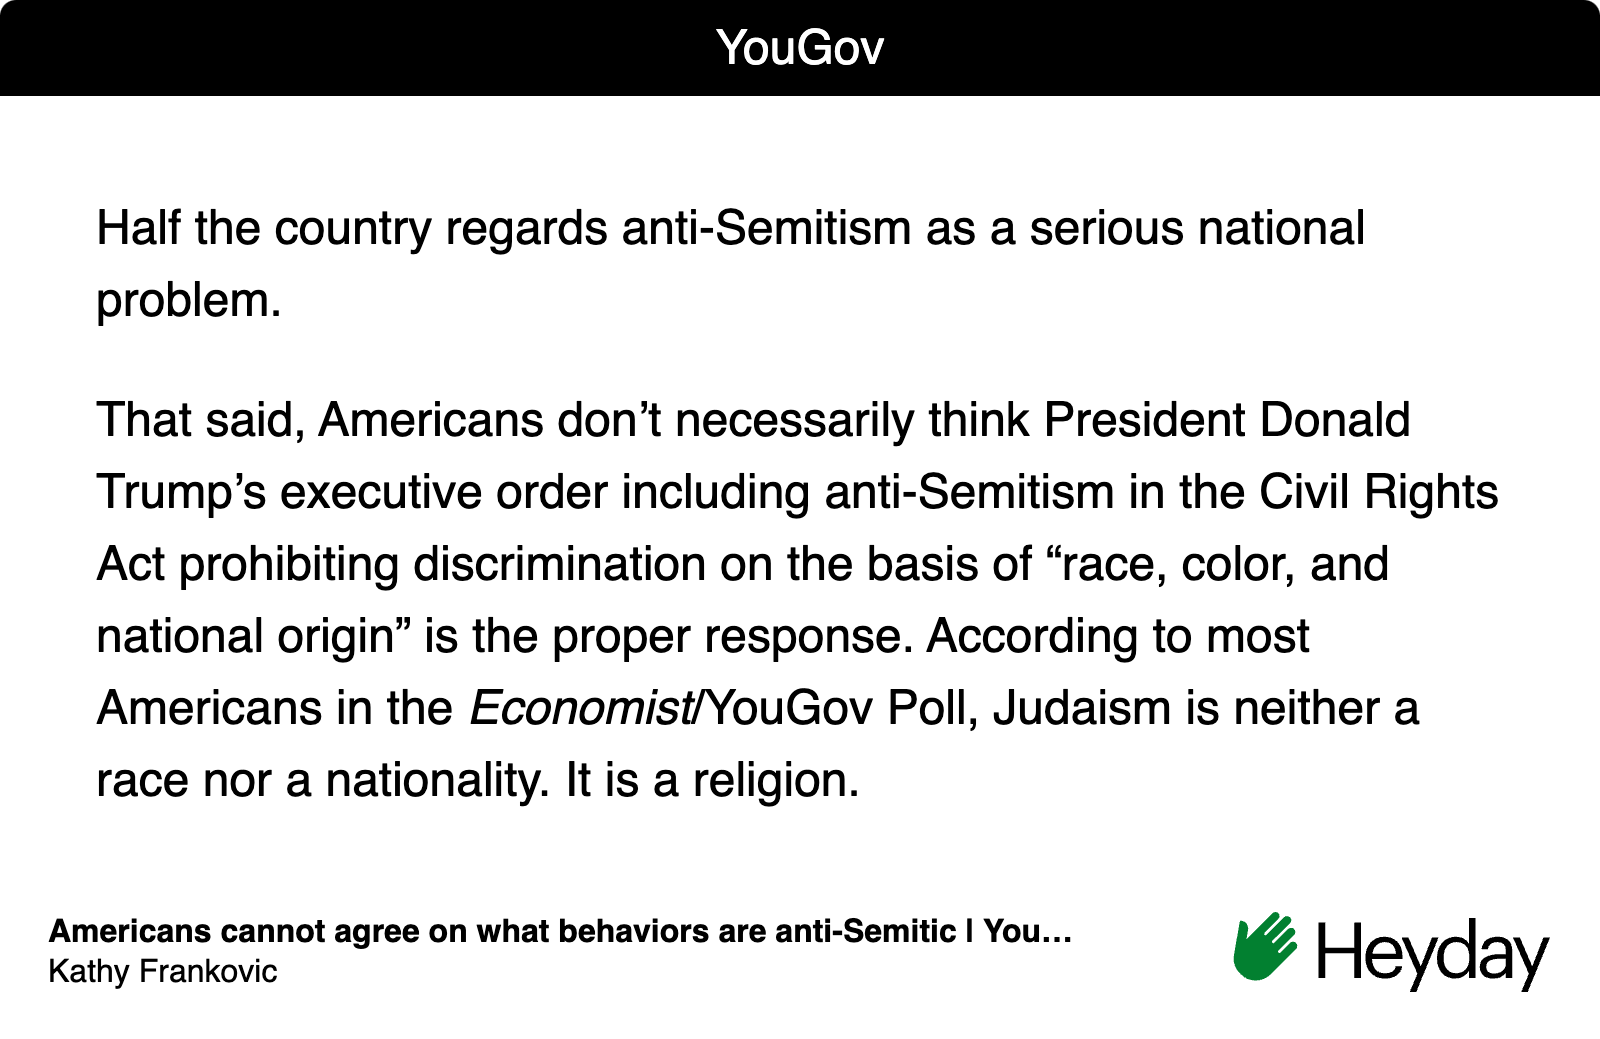 White image with text "Half the country regards anti-Semitism as a serious national problem. That said, Americans don’t necessarily think President Donald Trump’s executive order including anti-Semitism in the Civil Rights Act prohibiting discrimination on the basis of “race, color, and national origin” is the proper response. According to most Americans in the Economist/YouGov Poll, Judaism is neither a race nor a nationality. It is a religion." from you.gov with Heyday logo and green hand